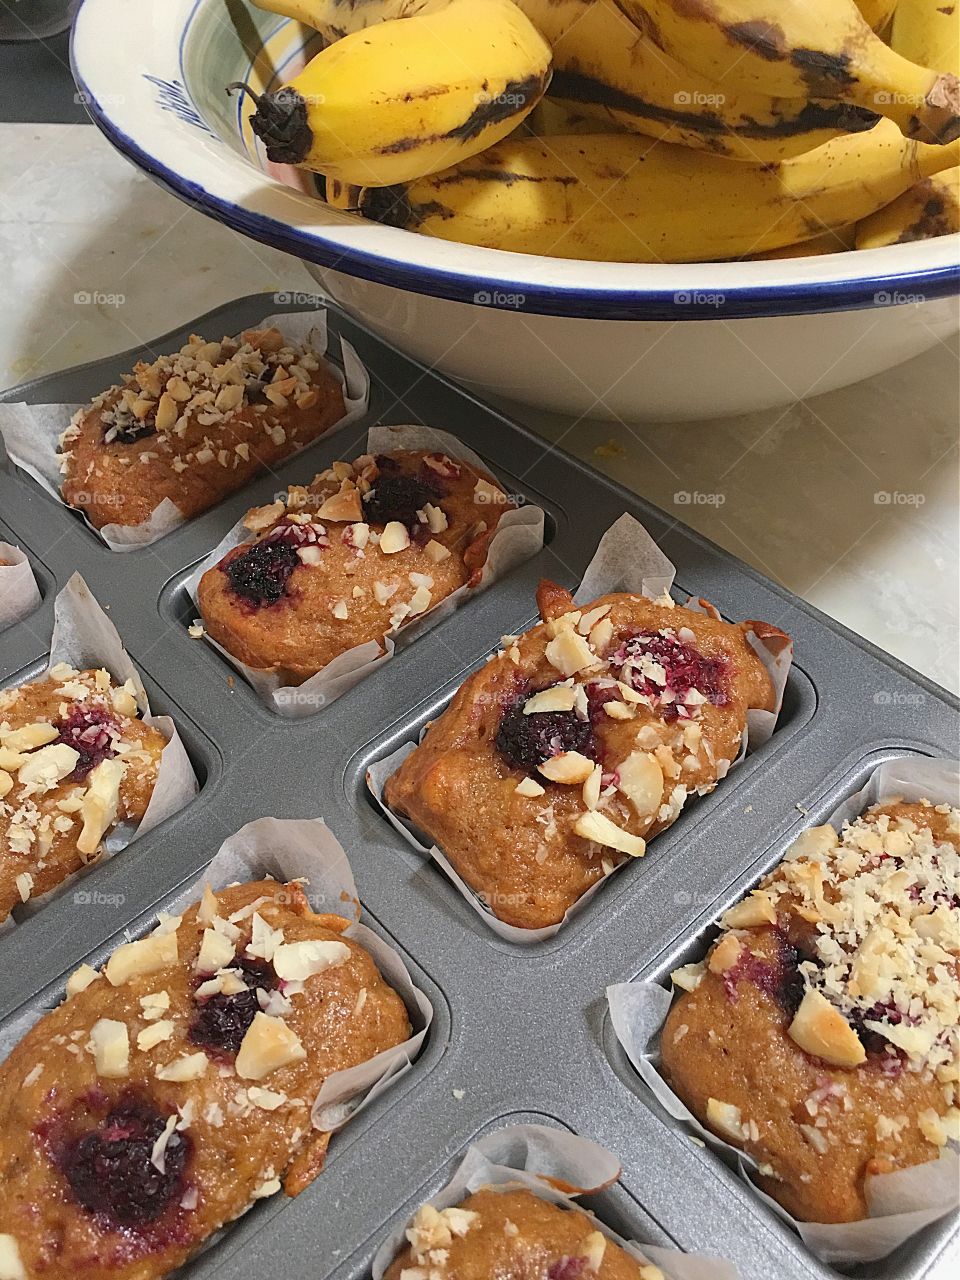 Mini Banana and wild Blackberry Bread Loaves, with organic coconut sugar and topped with crushed macadamia nuts